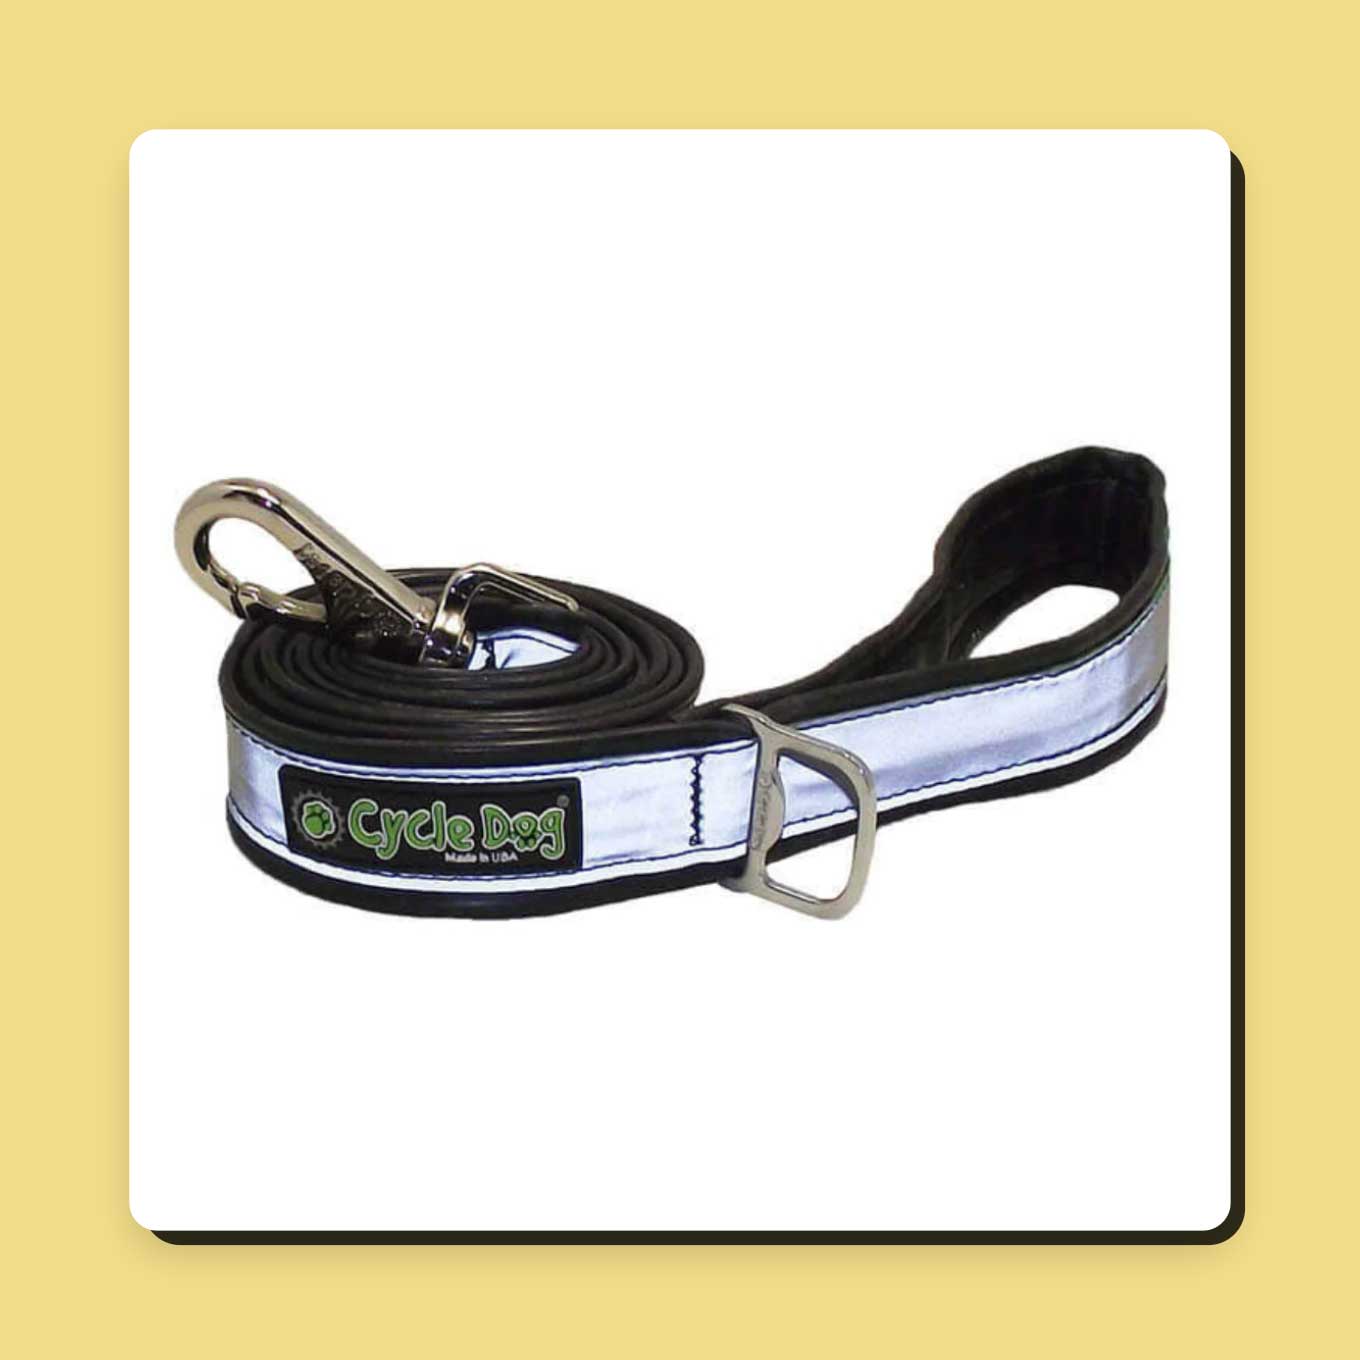 A leash from Cycle Dog